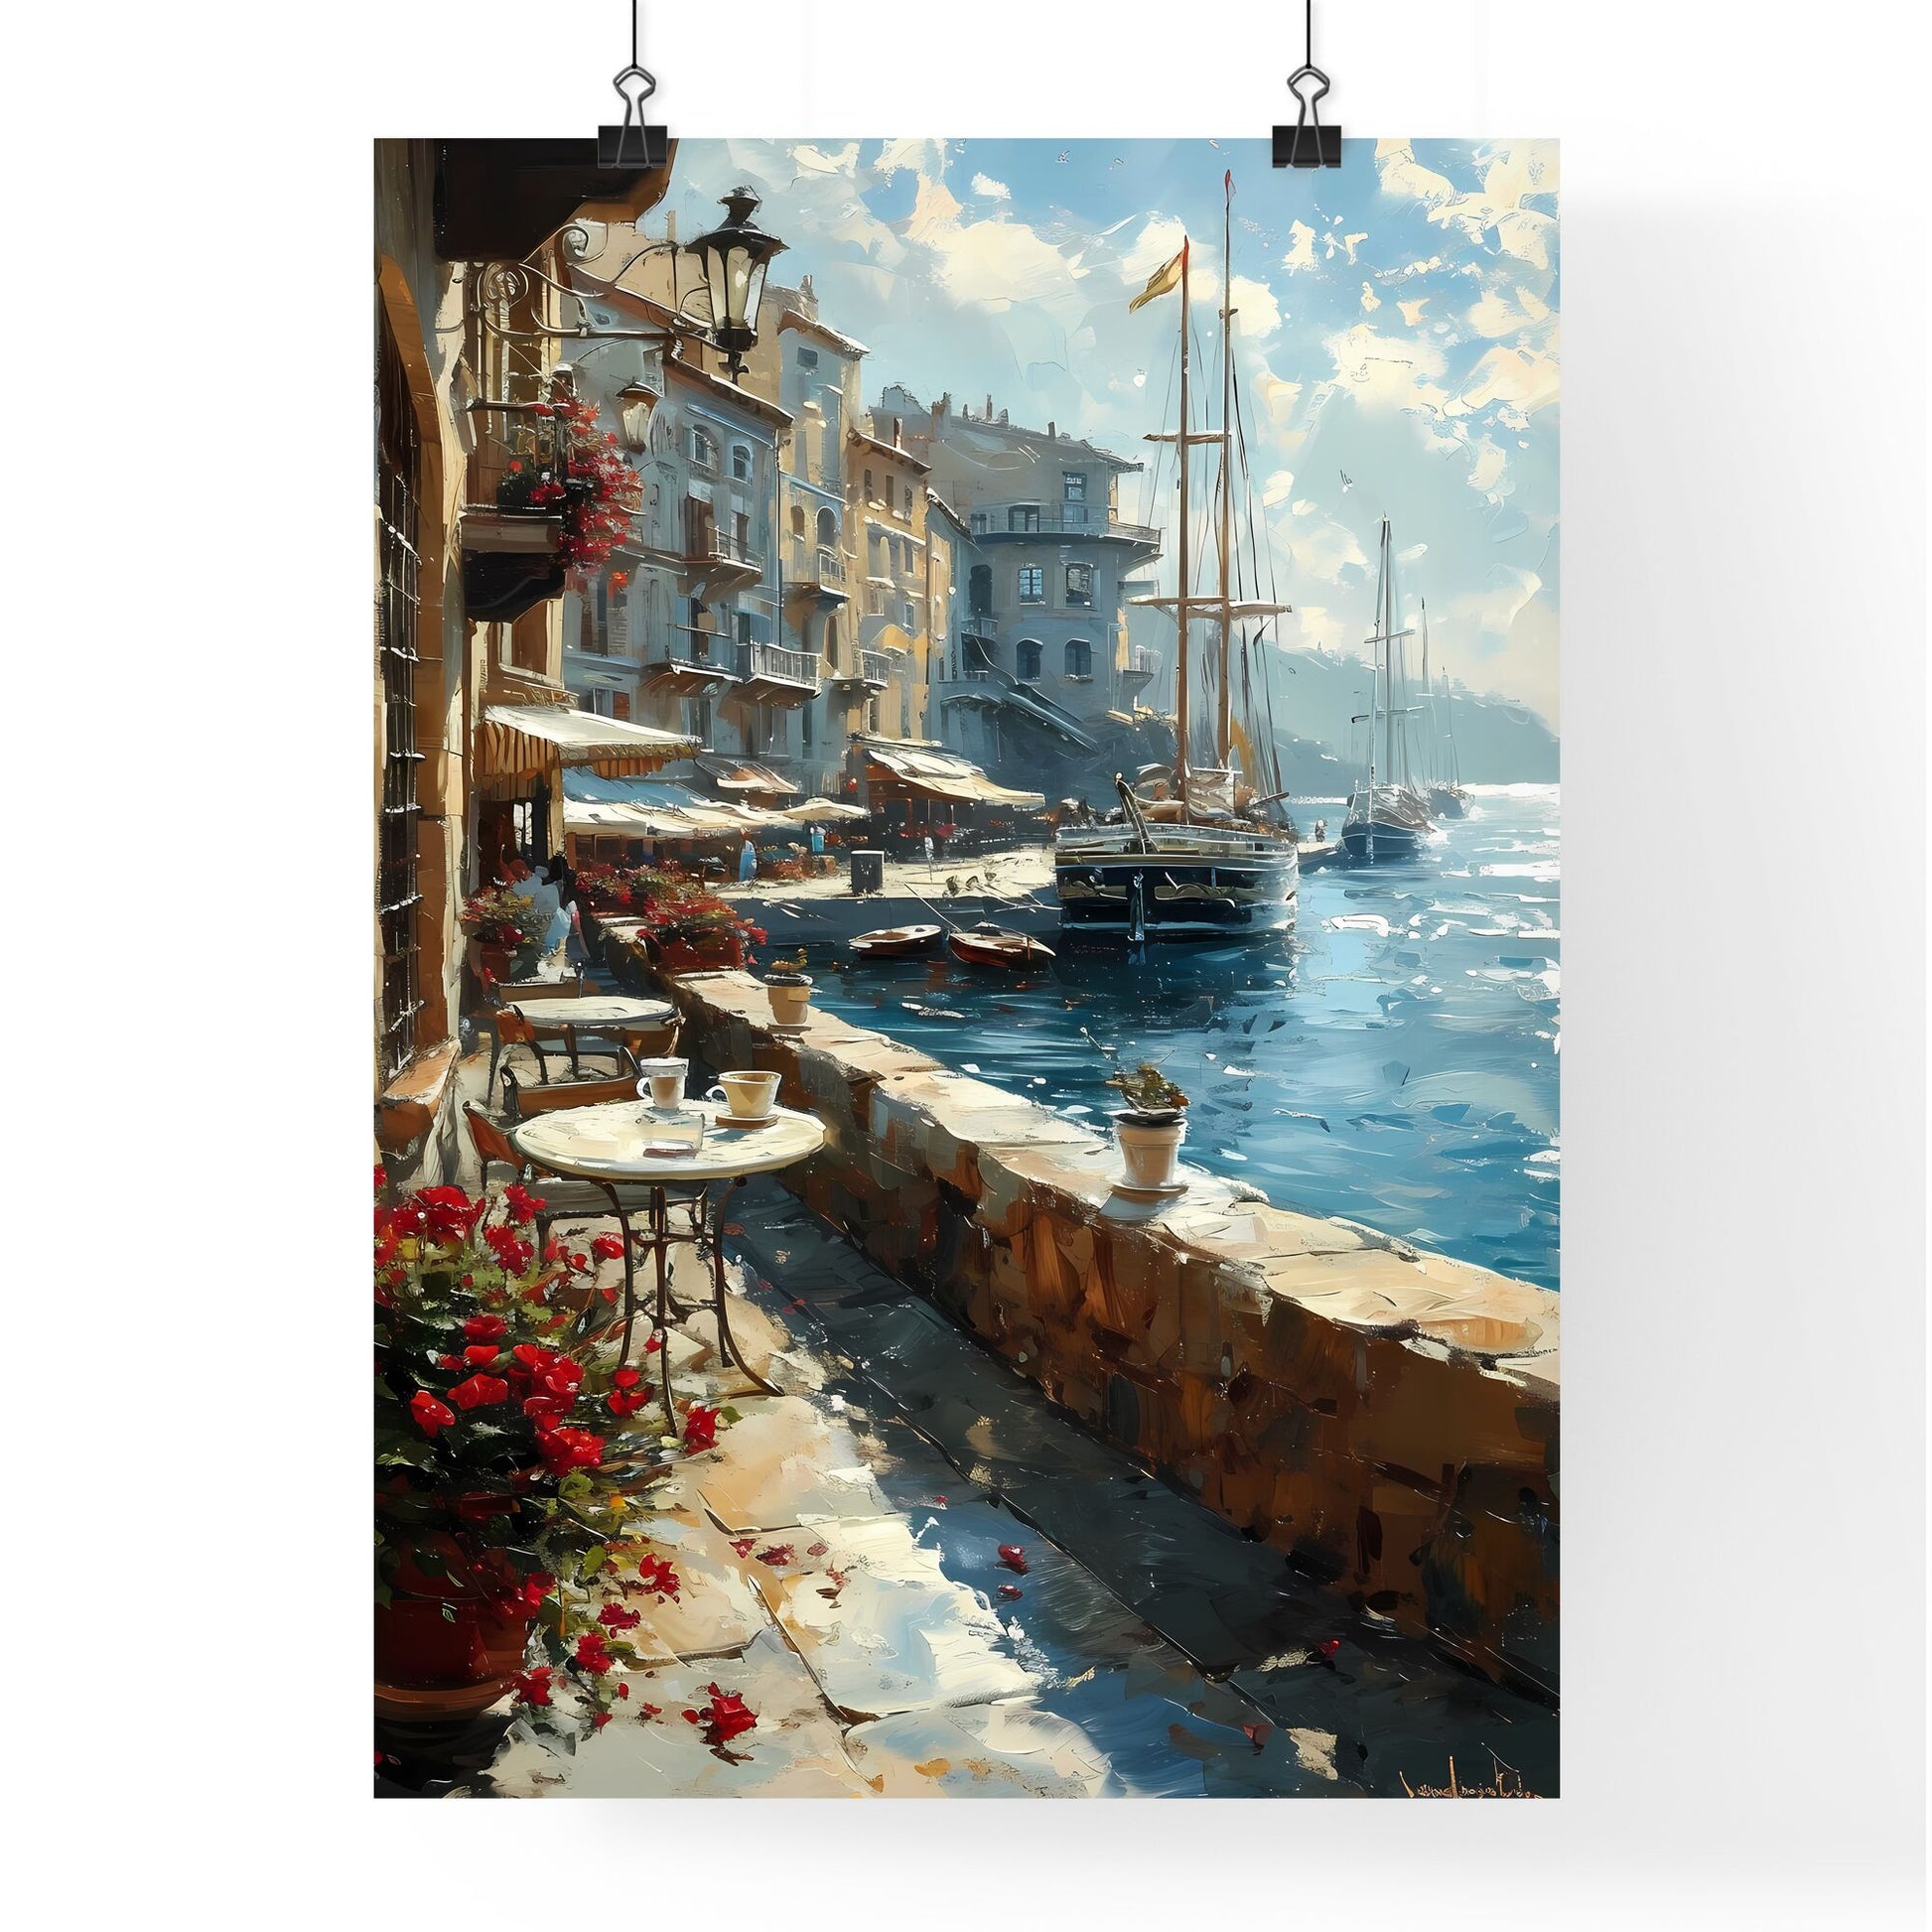 A Poster of A beautiful woman is drinking coffee - A Waterfront With Boats And Tables Default Title